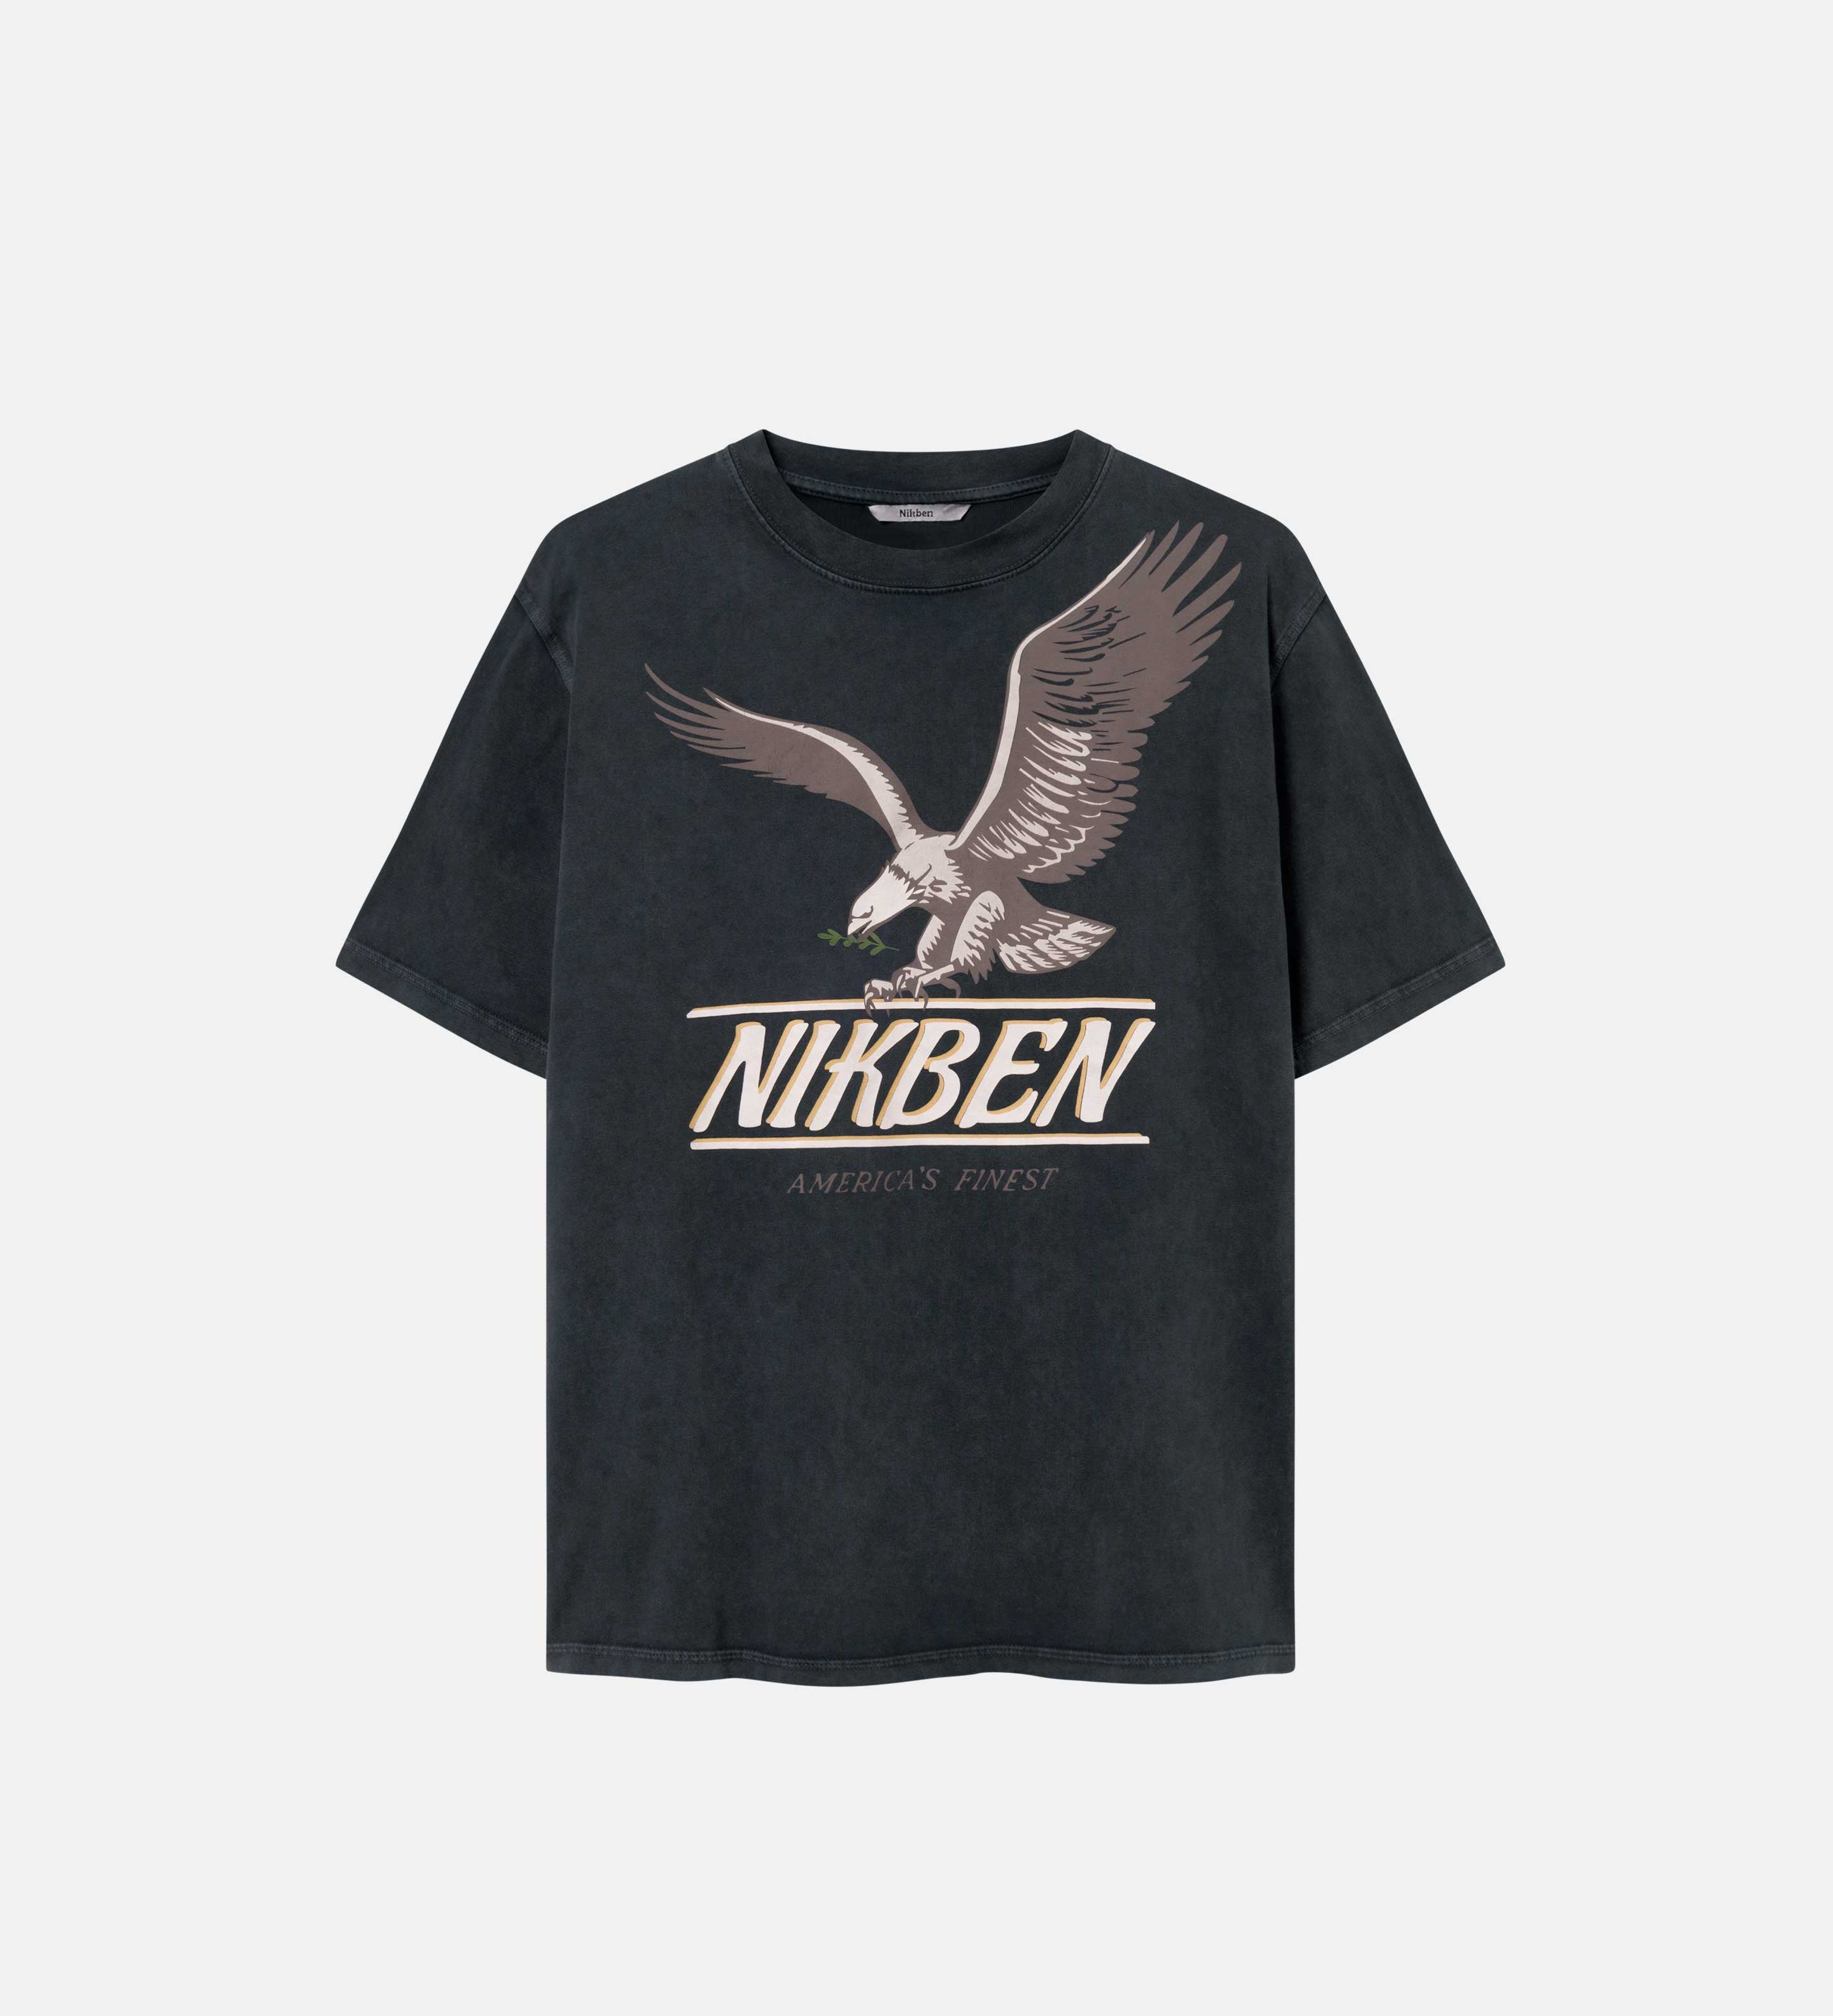 A black t-shrit with a large eagle chest print, Nikben logo and the text "Americas finest"